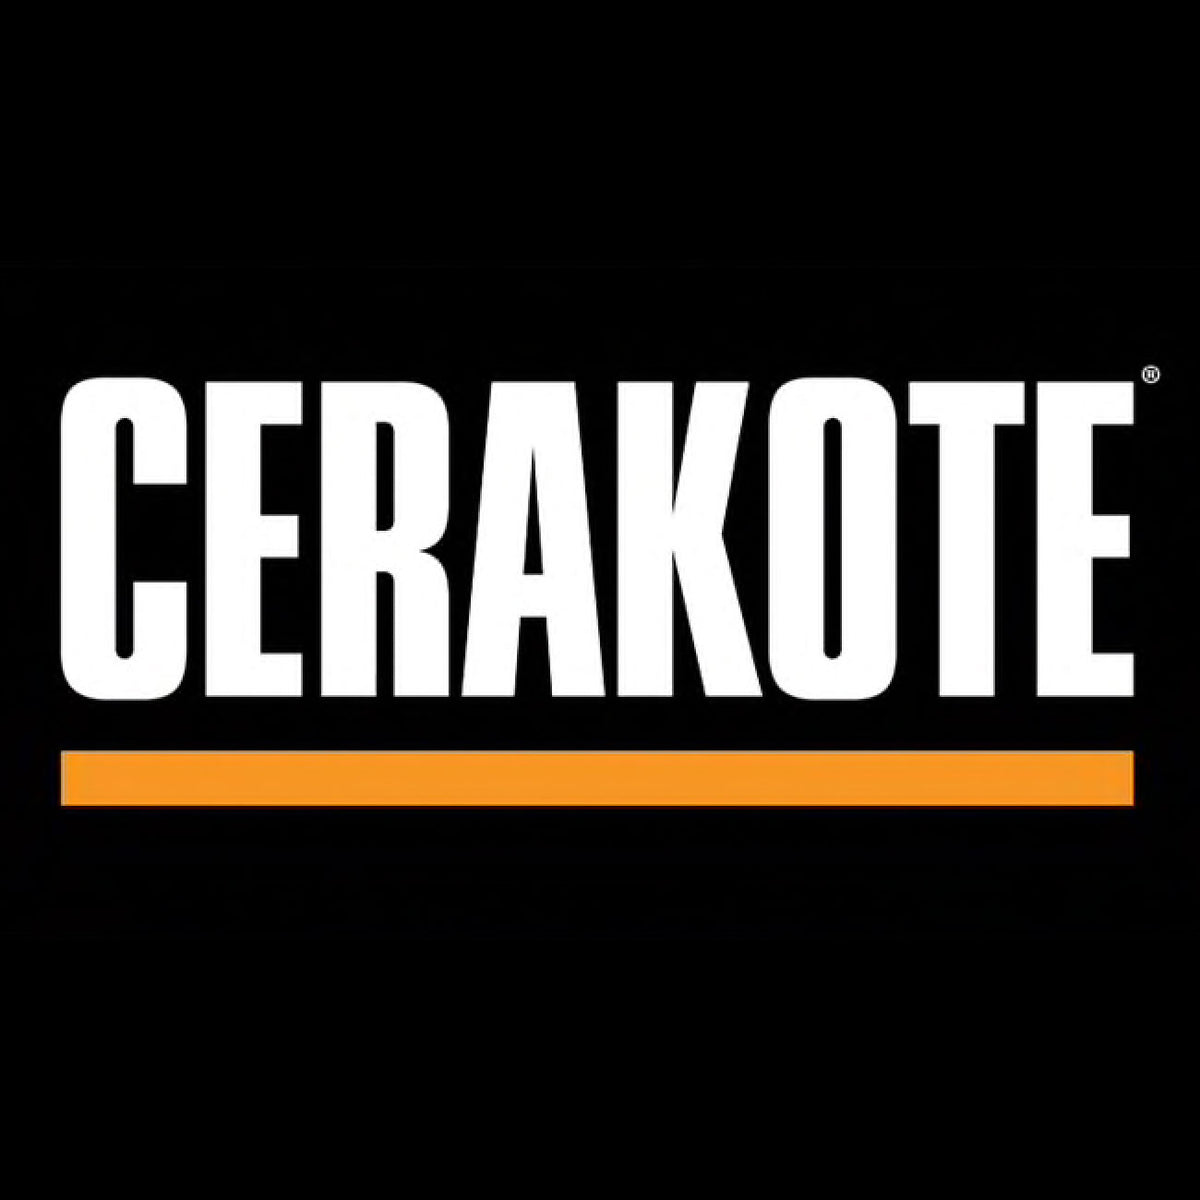 Cerakote® Service - Mechanical Keyboards & Accessories – Space Cables